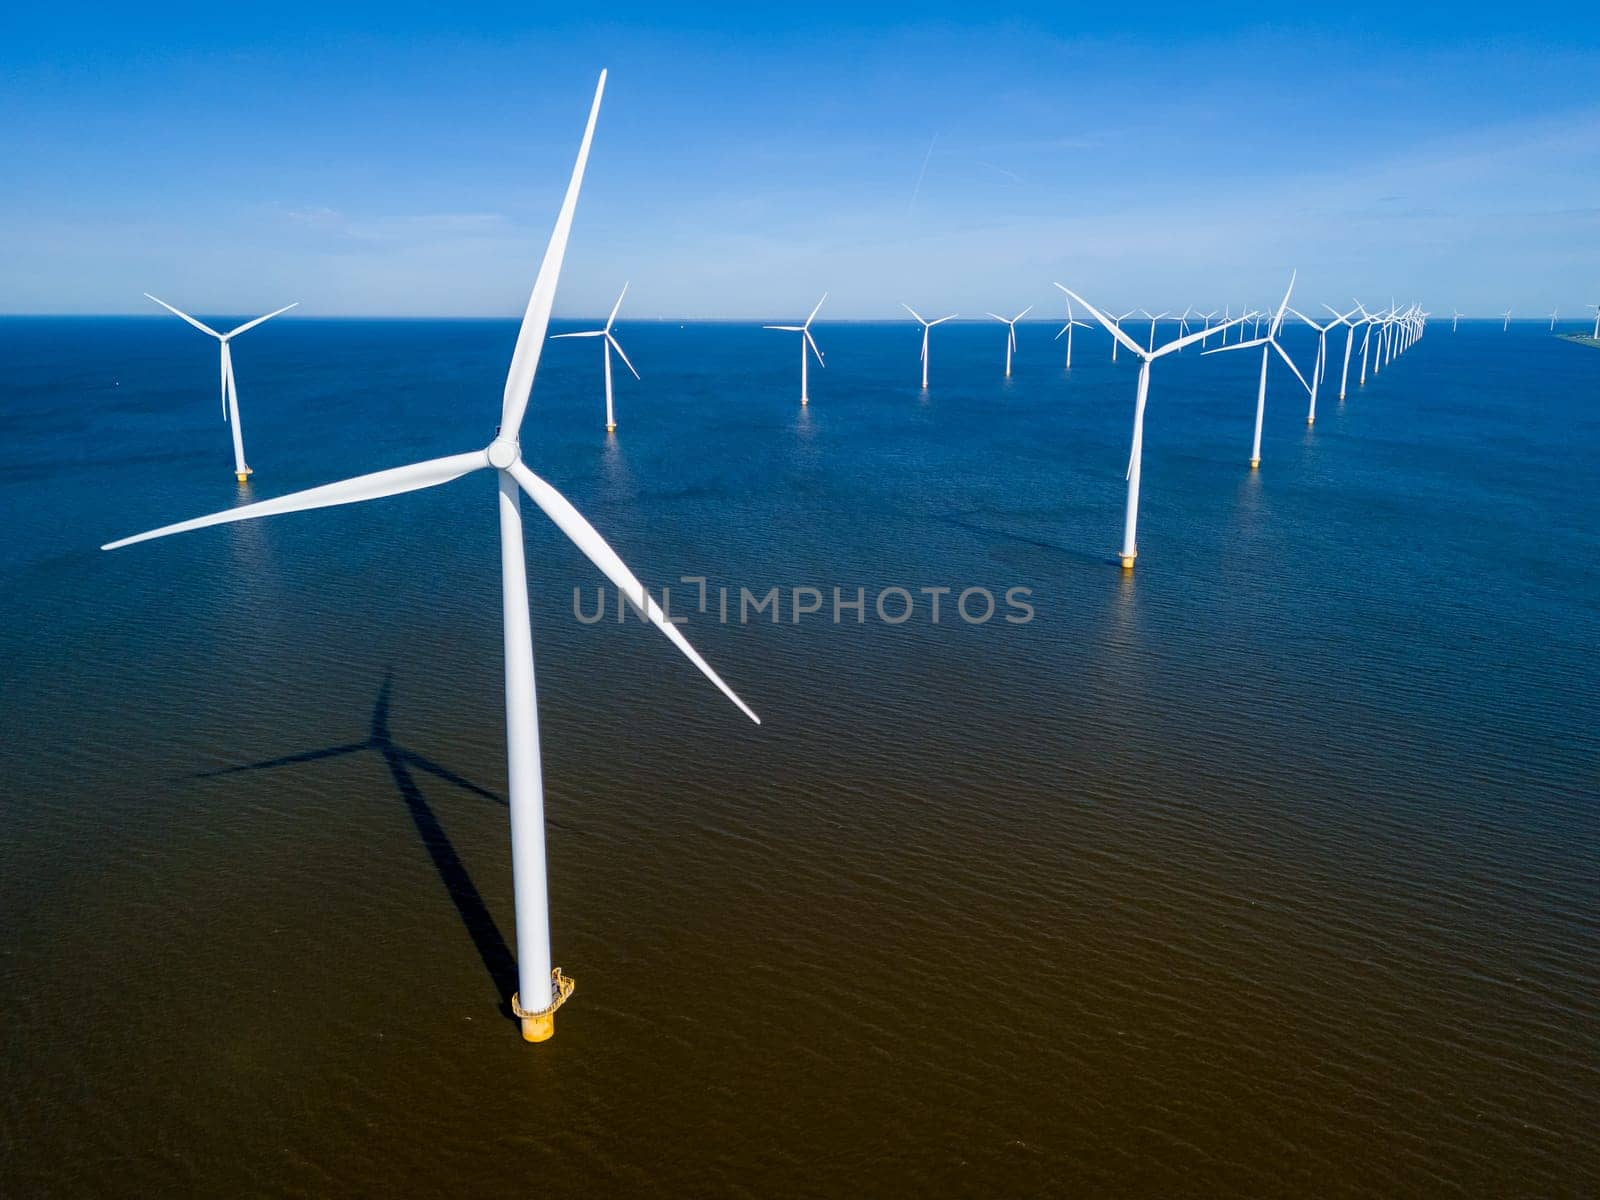 A group of windmills in the Netherlands Flevoland region during the vibrant season of Spring by fokkebok